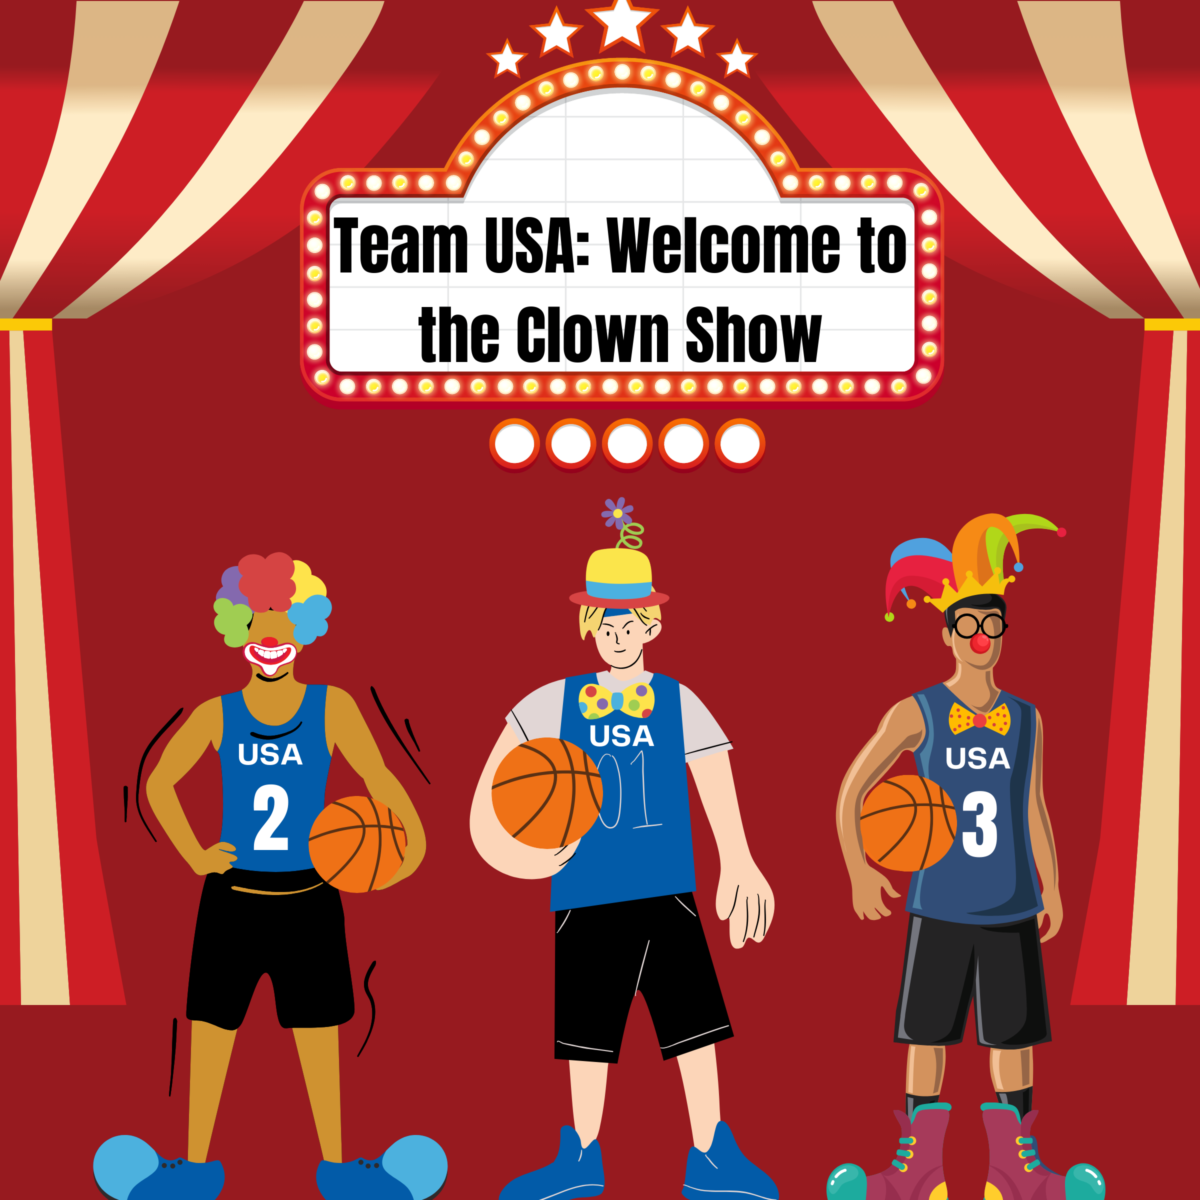 Traditionally a top contender, Team USA placed fourth at the FIBA Basketball World Cup. They lost to Lithuania, Germany, and Canada along the way, leading many fans to consider the team an embarrassment. 
-Made in Canva